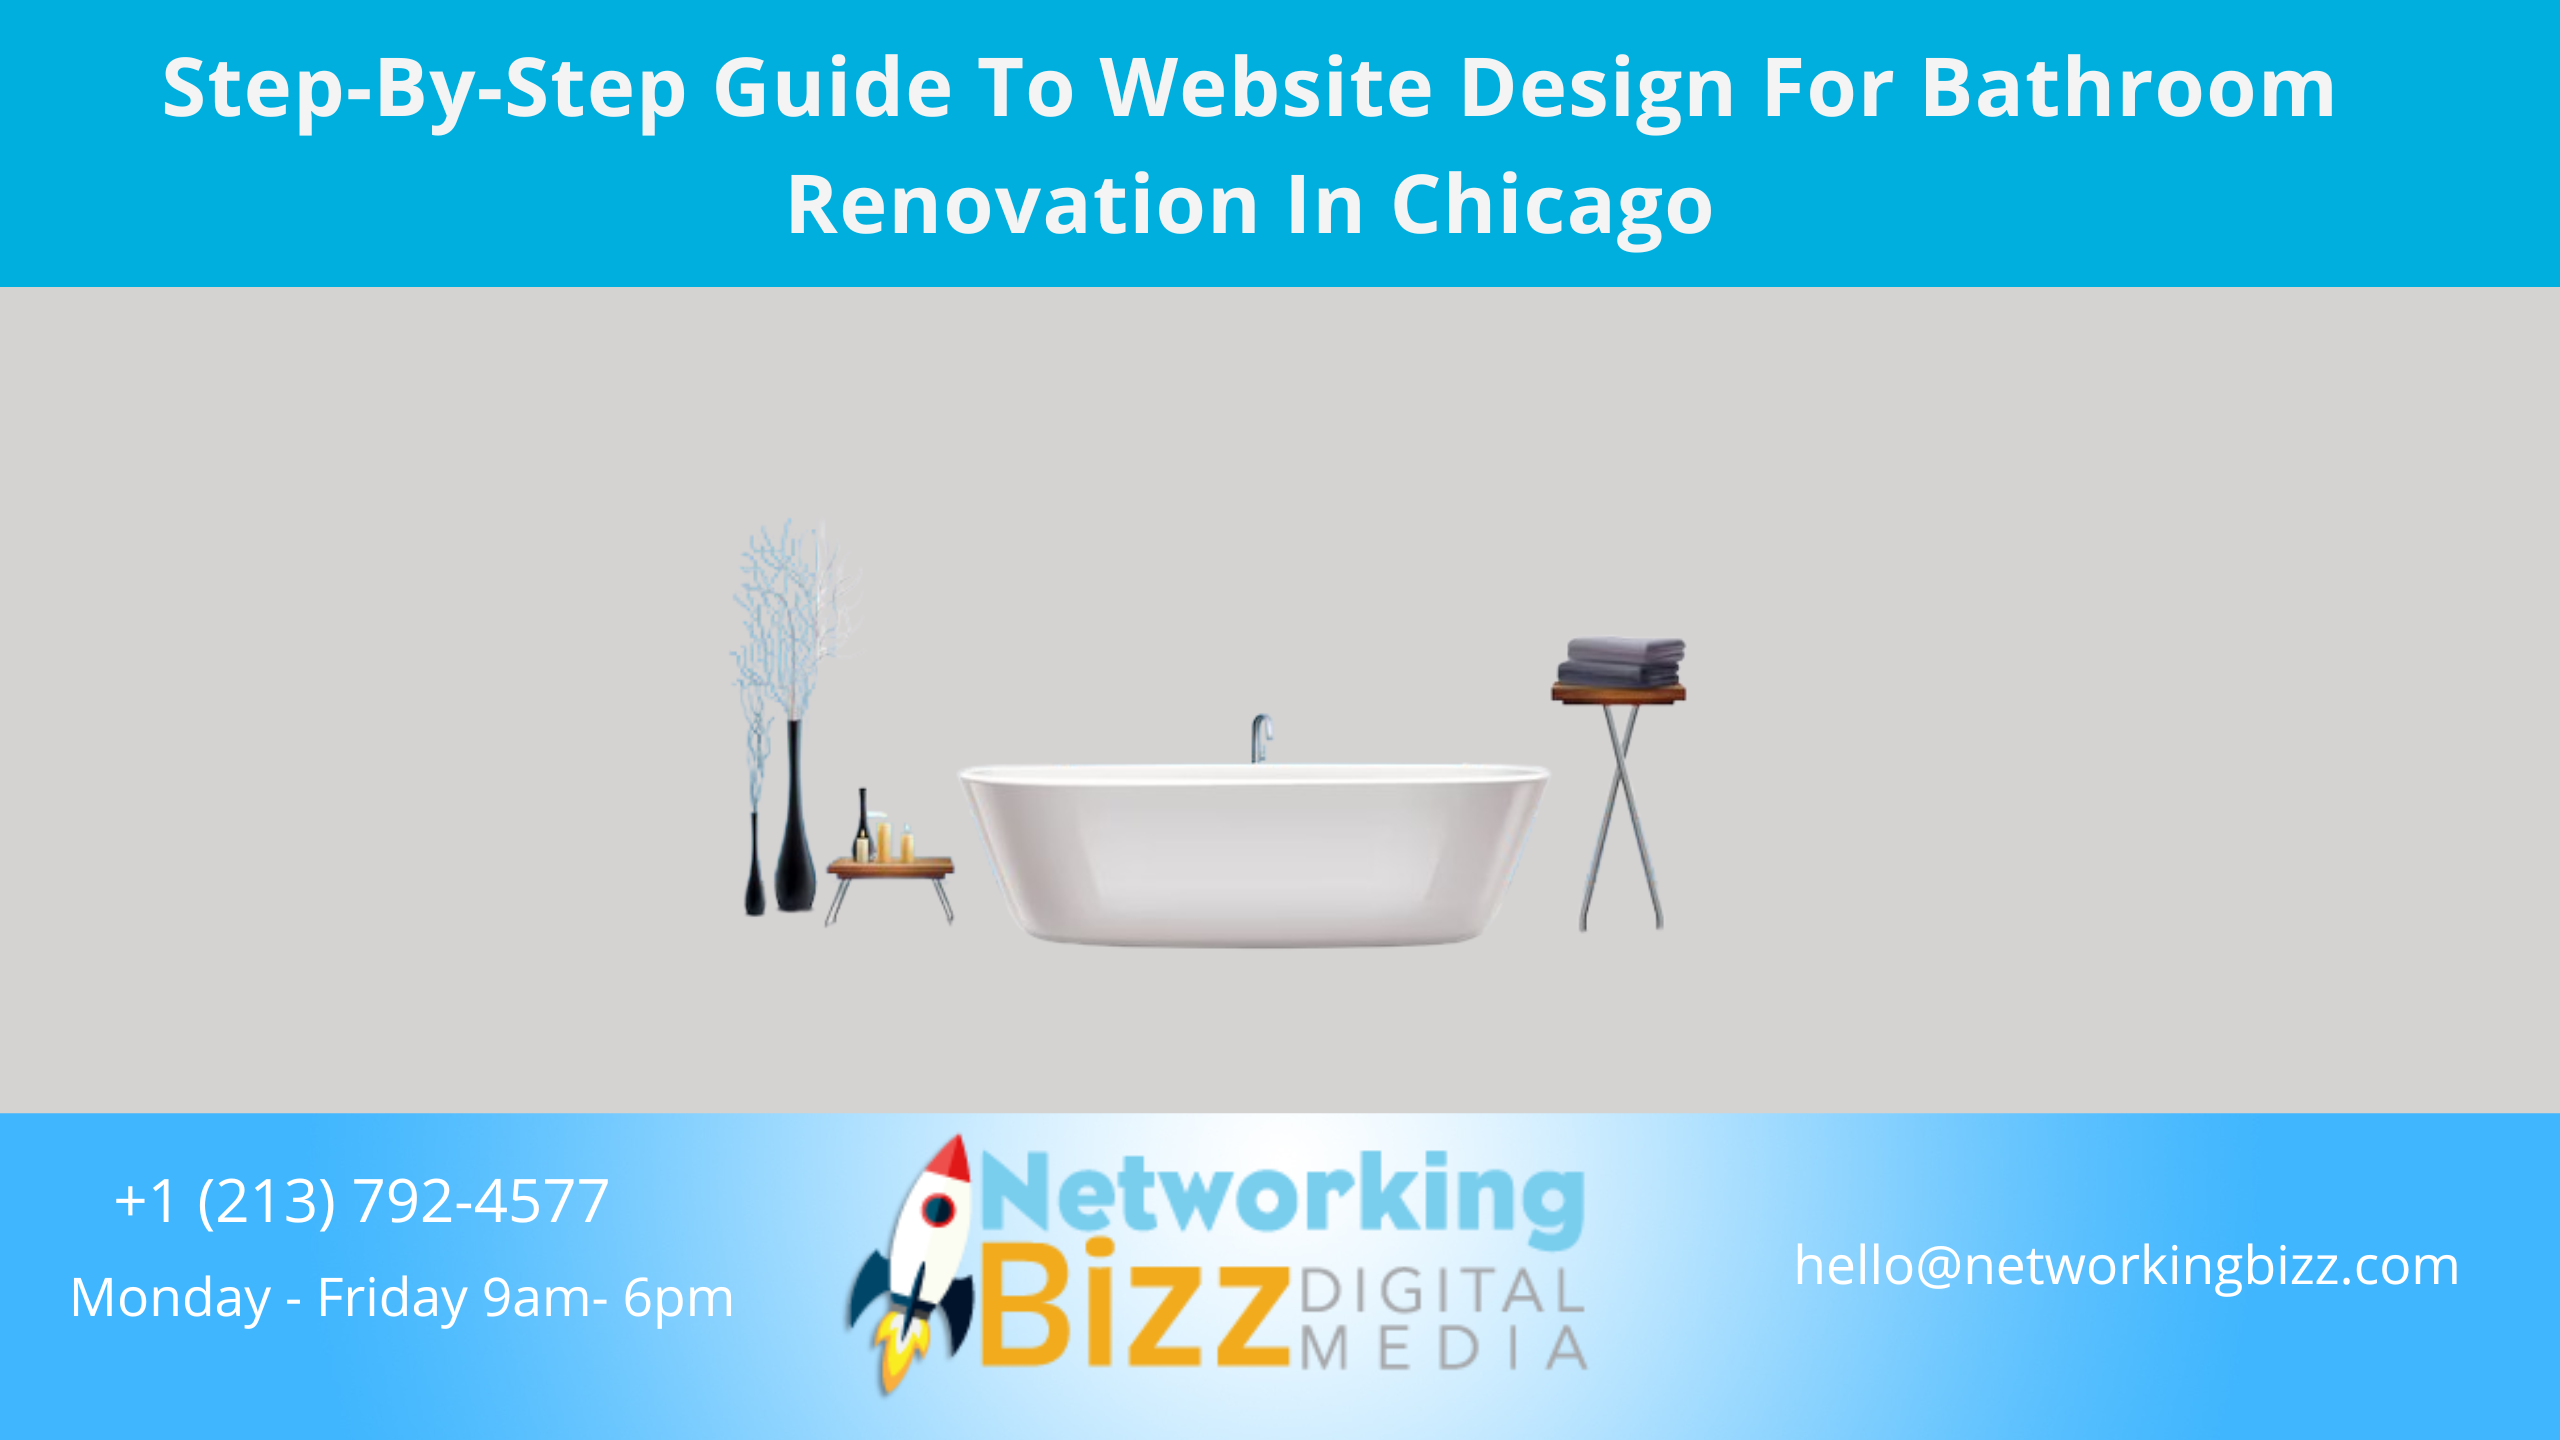 Step-By-Step Guide To Website Design For Bathroom Renovation In Chicago